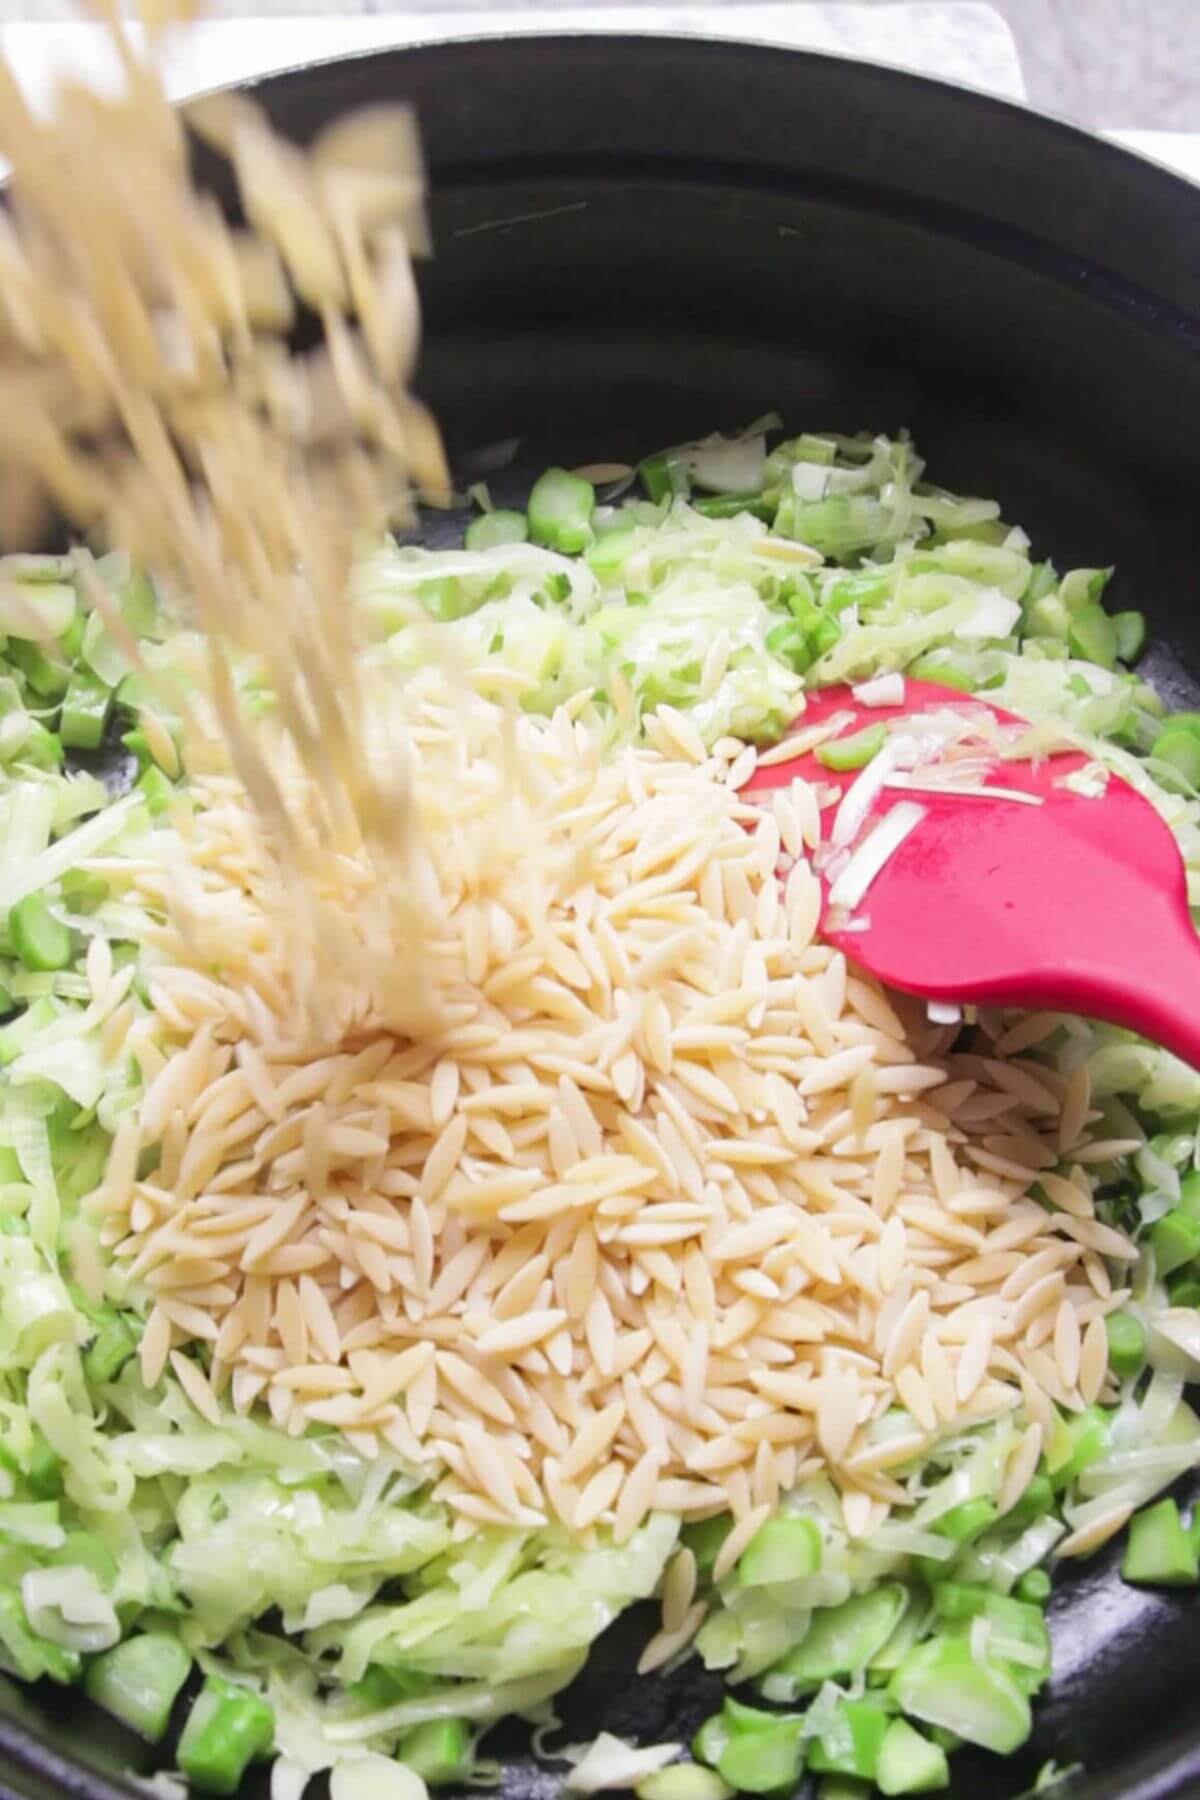 Orzo being poured into a black and red pan with leeks, broccolini and garlic.